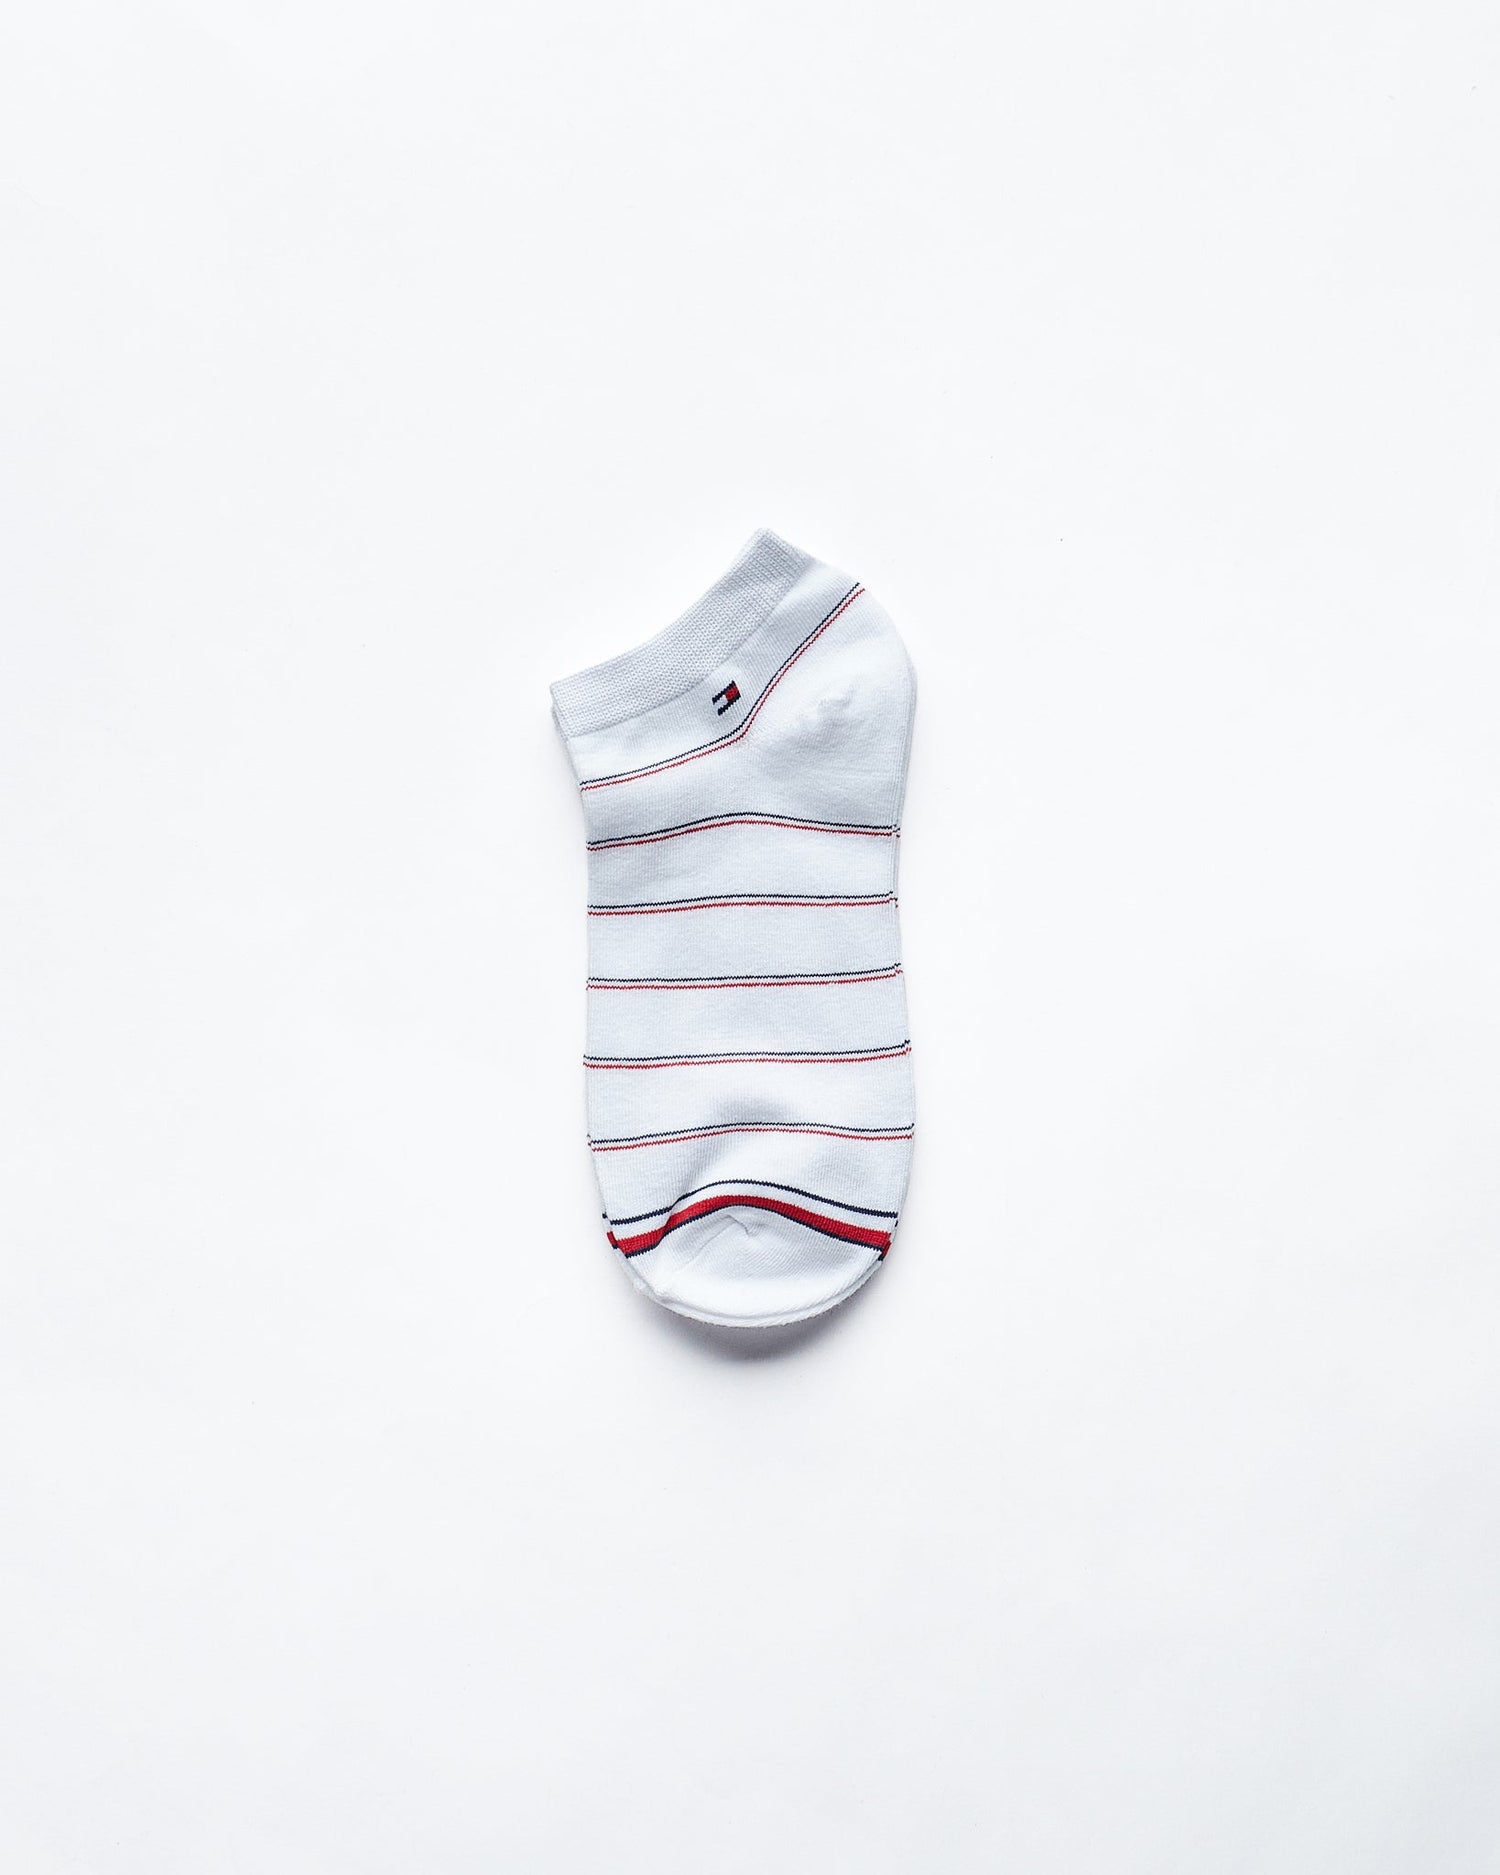 MOI OUTFIT-Striped Over Printed Low Cut 3 Pairs Socks 7.90